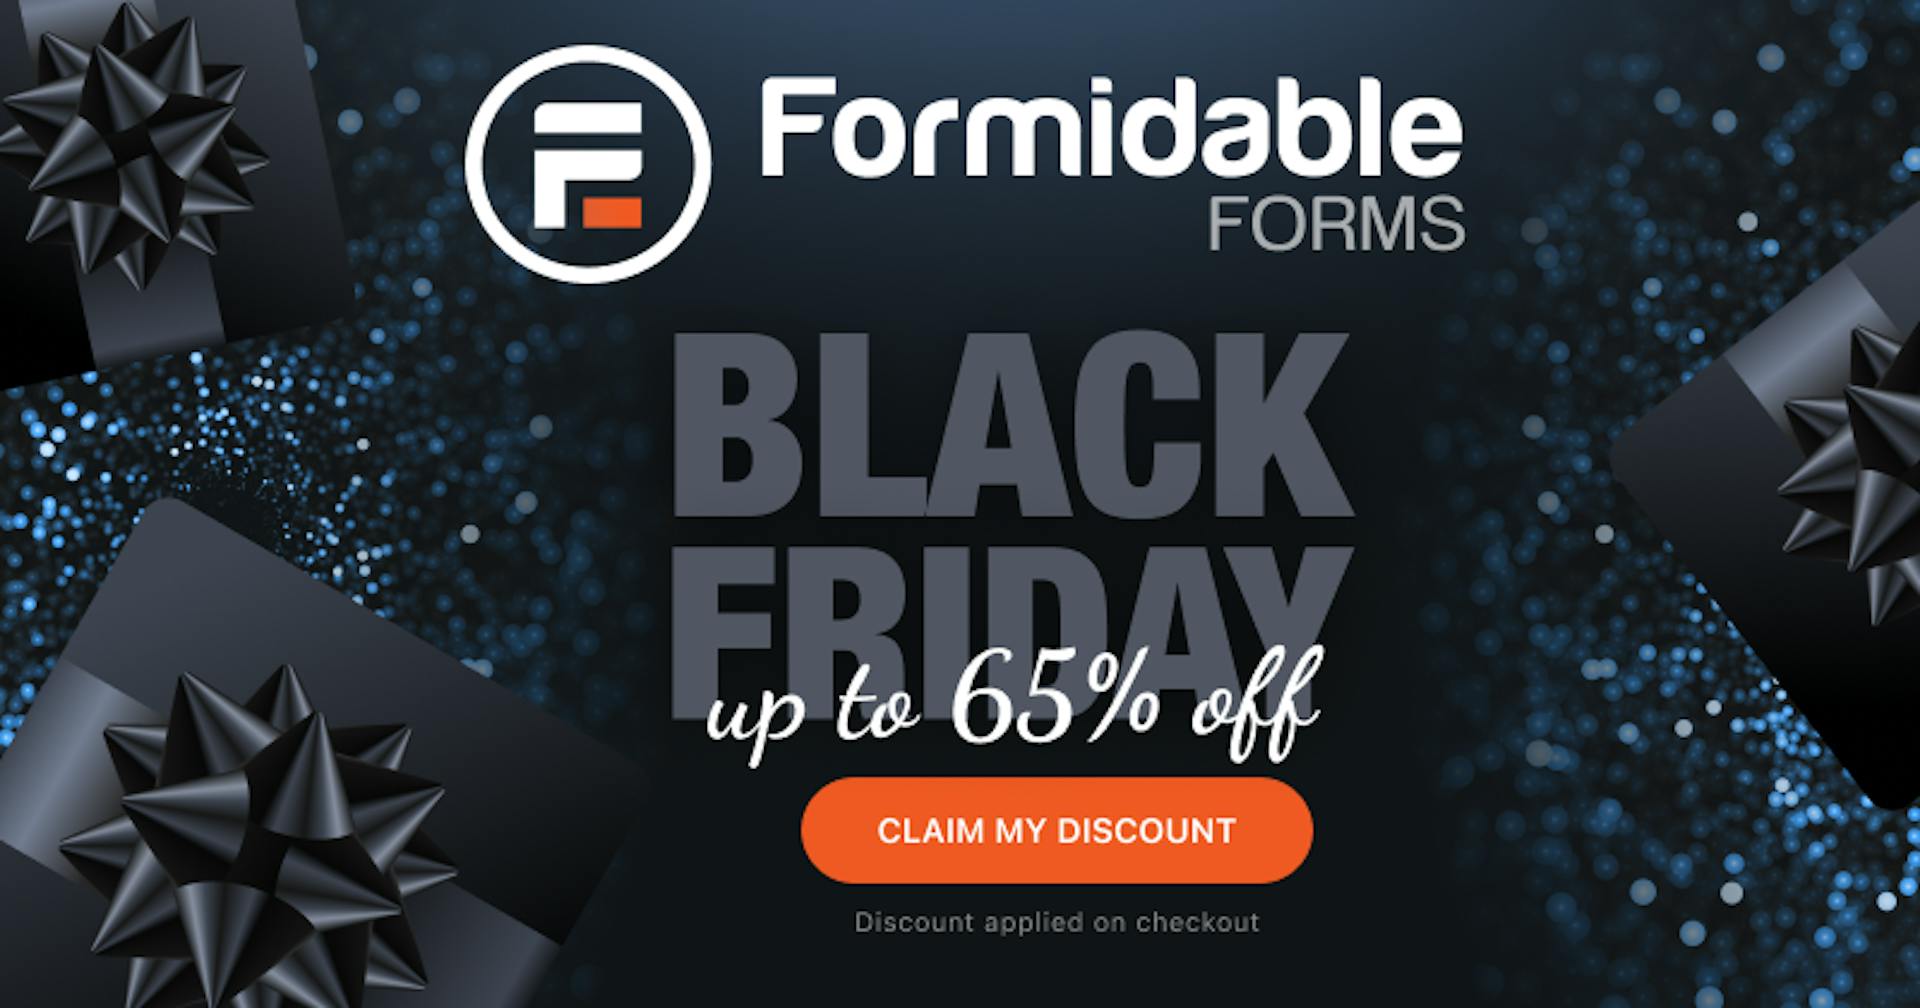 Formidable Forms Black Friday Deal 2021